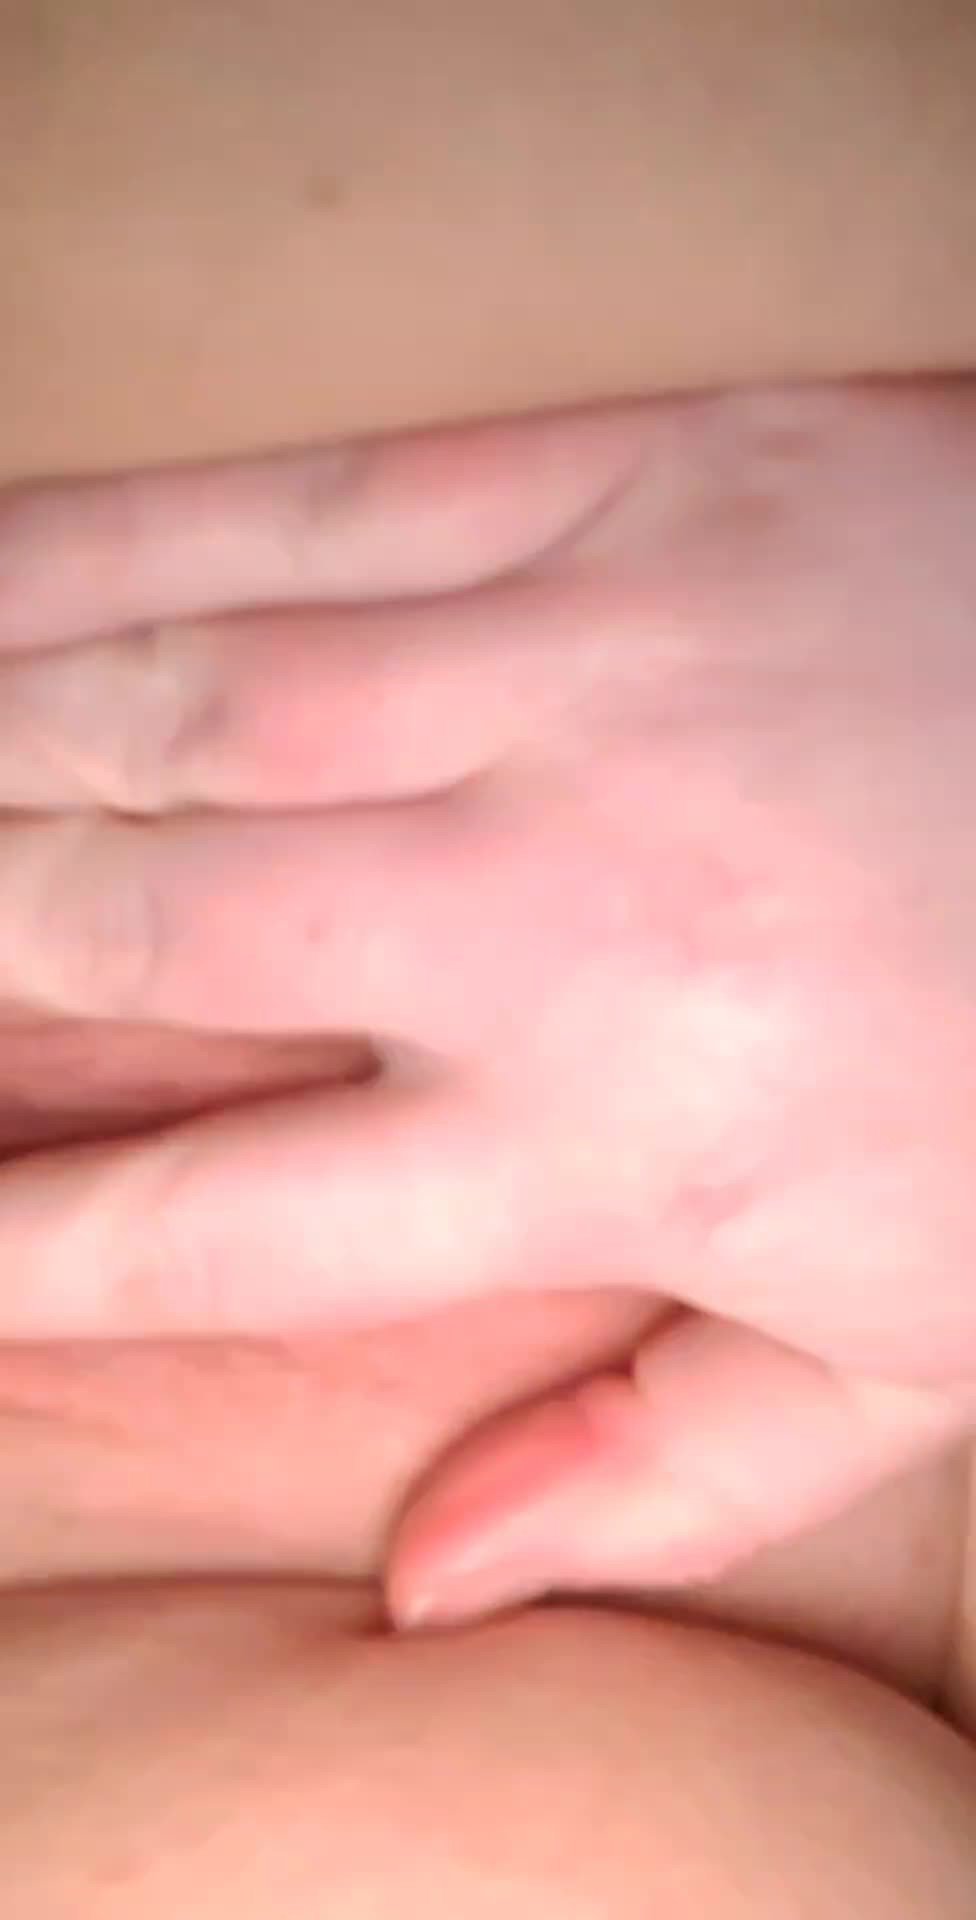 Video by enchantress.crystal with the username @enchantress.crystal, who is a verified user,  January 11, 2022 at 3:15 PM. The post is about the topic Fingering and the text says 'who wants to help play'